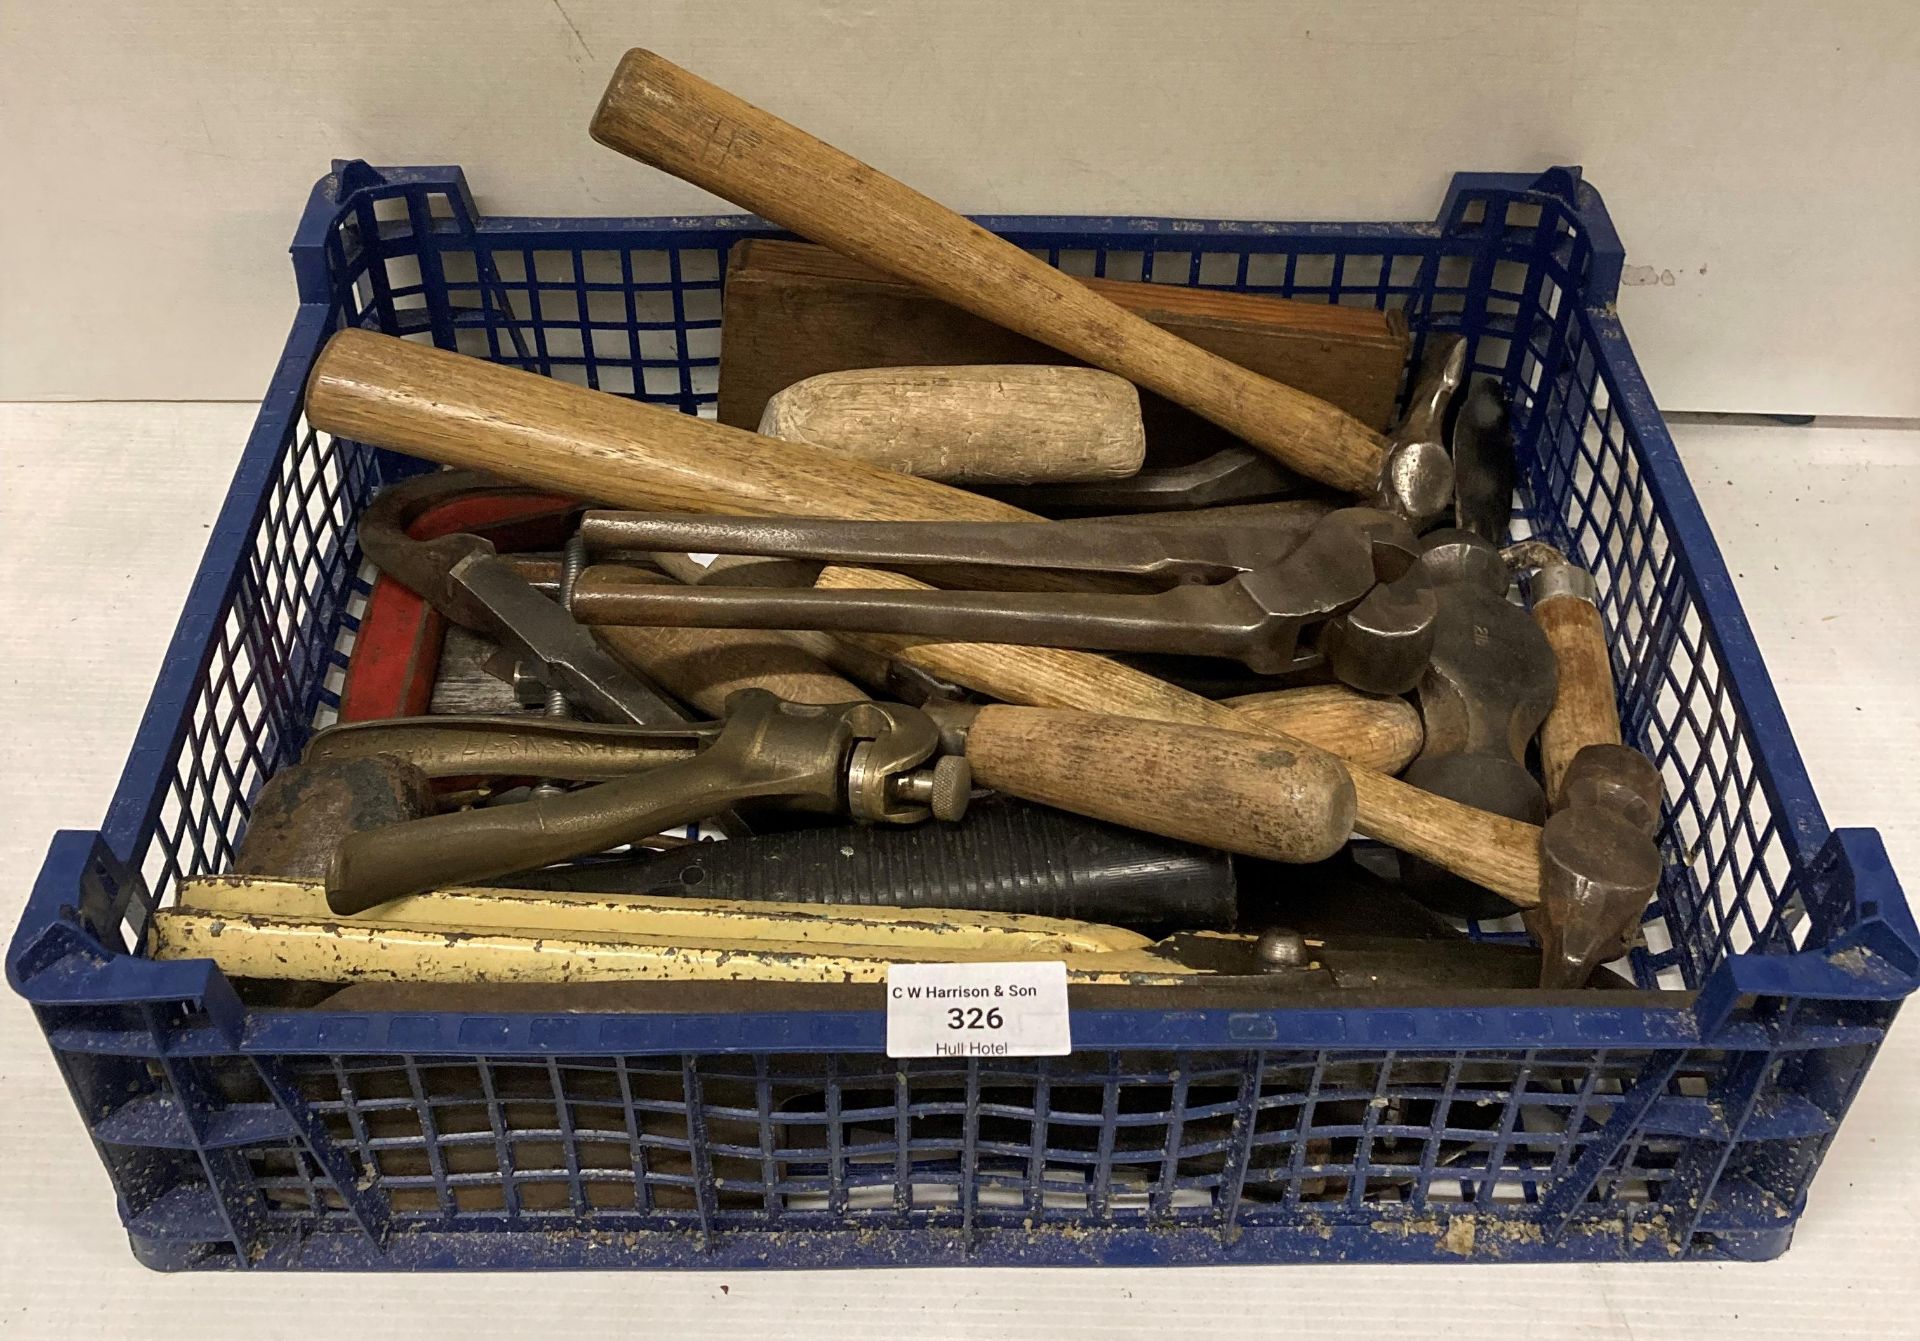 Contents to crate - assorted hand tools including hammers, stone chisels, trowels, snips,